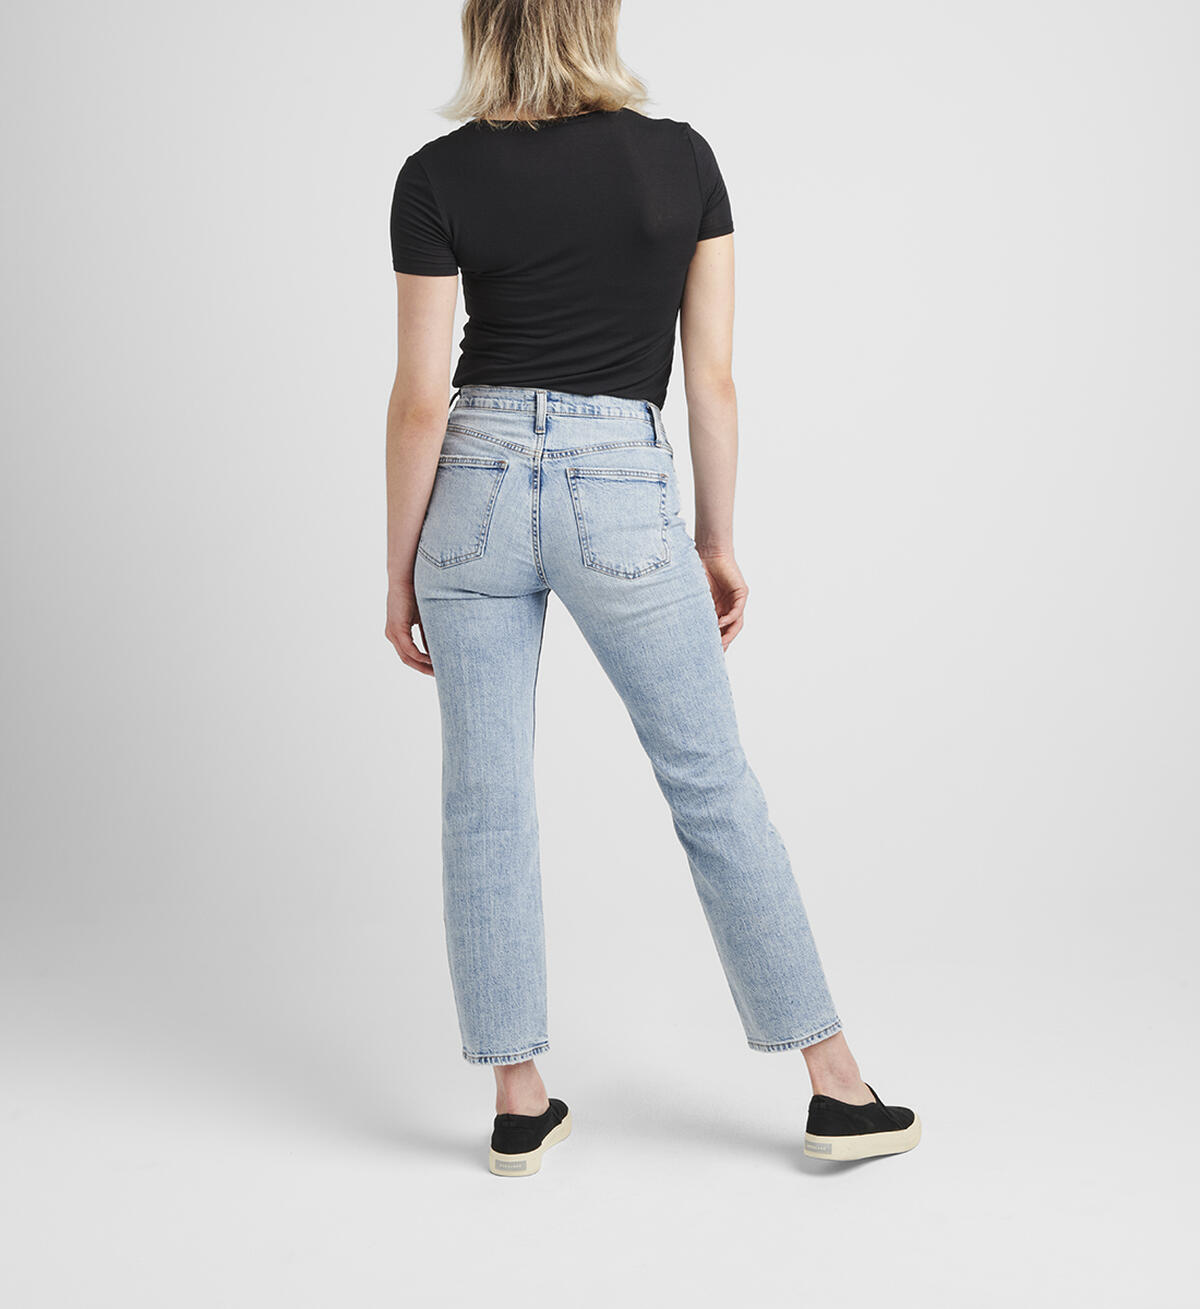 Frisco High Rise Straight Leg Jeans, , hi-res image number 1